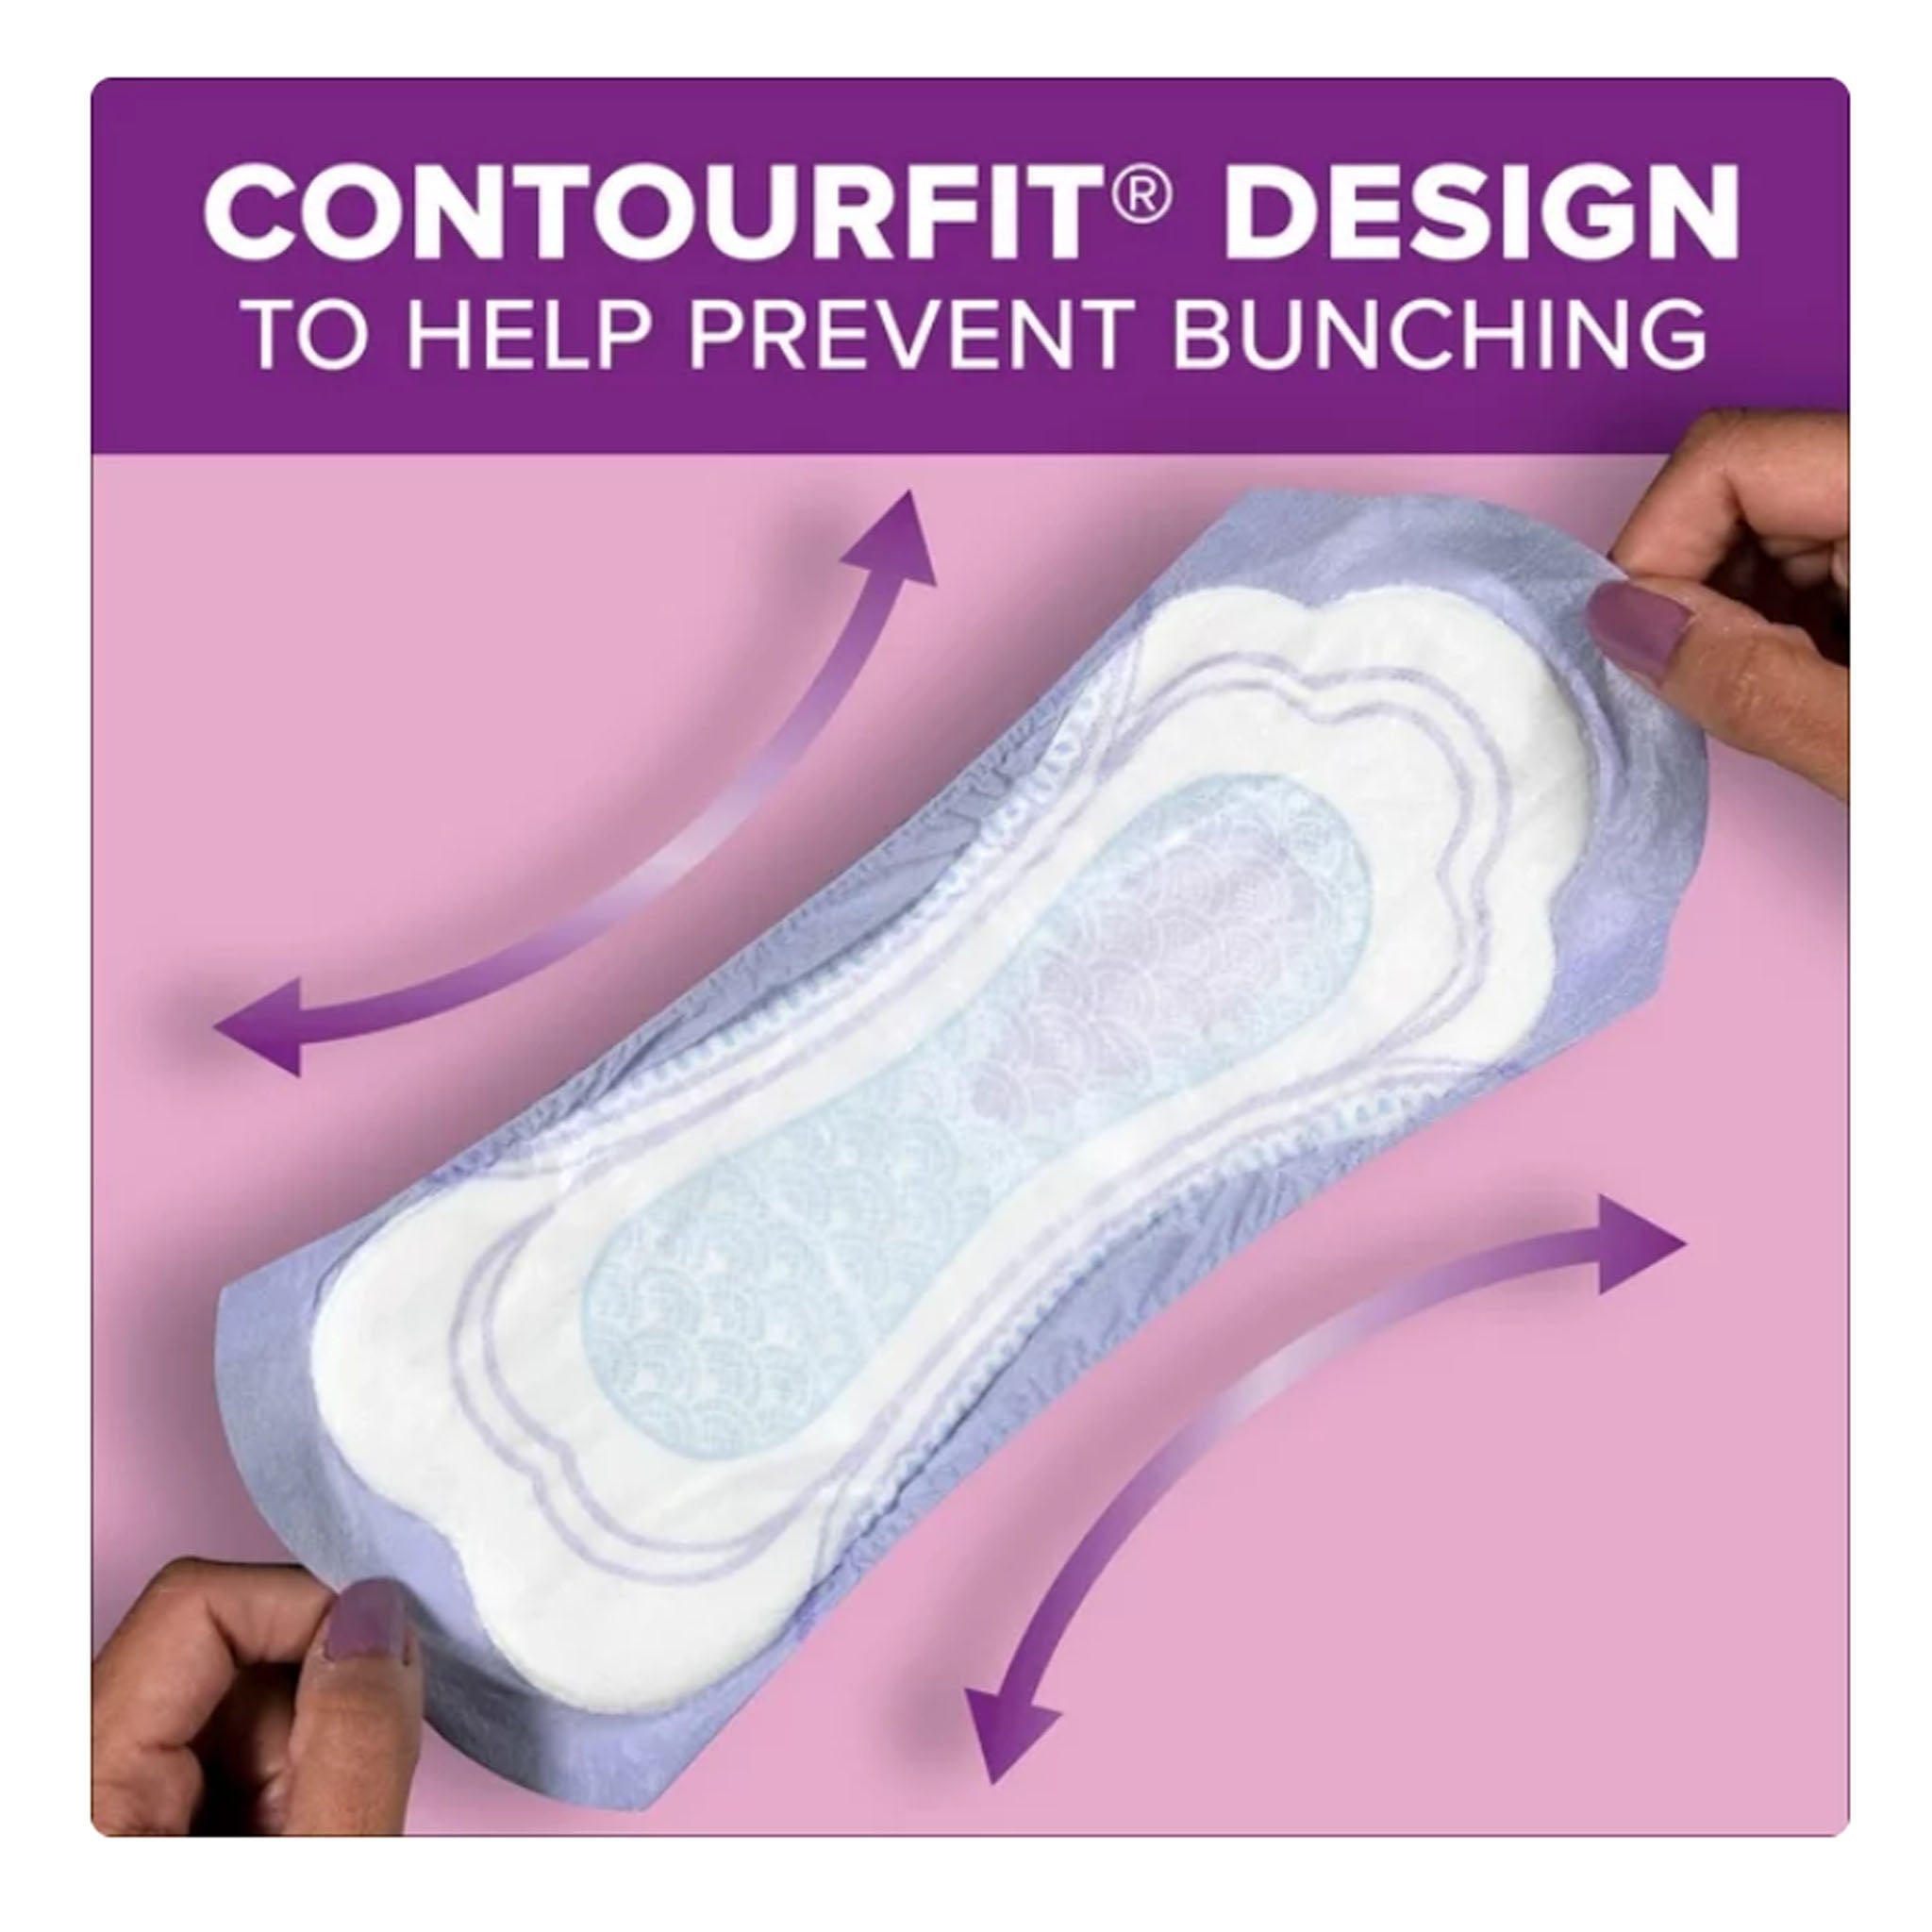 Save on Always Discreet Incontinence Pads 4 Moderate Order Online Delivery